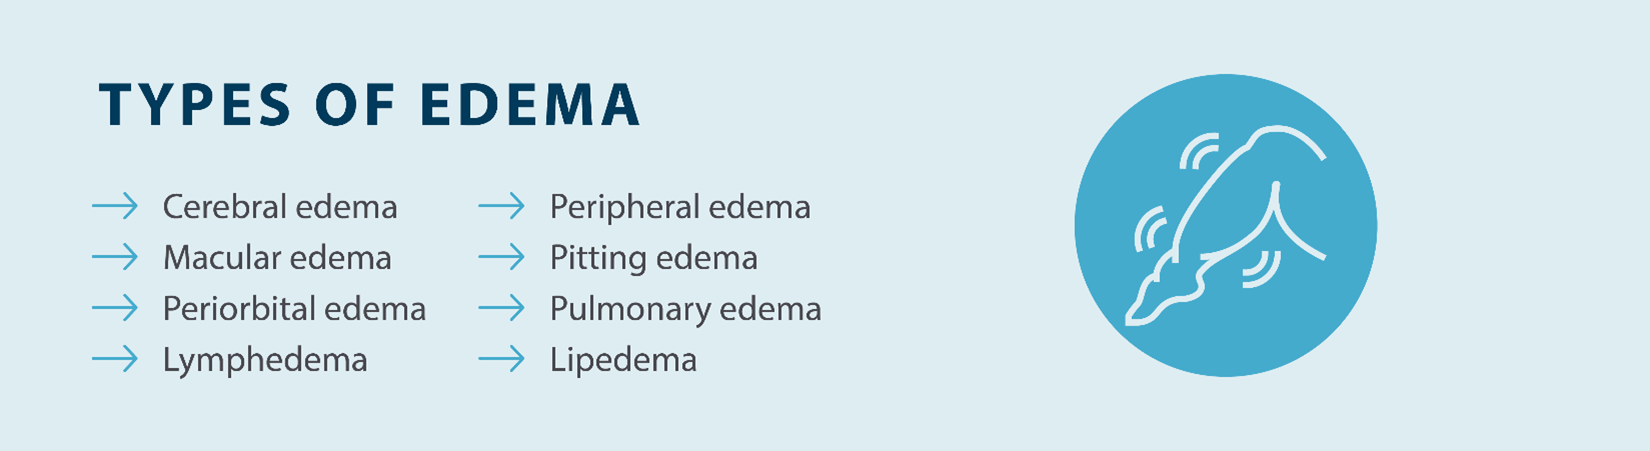 image of the different types of edema